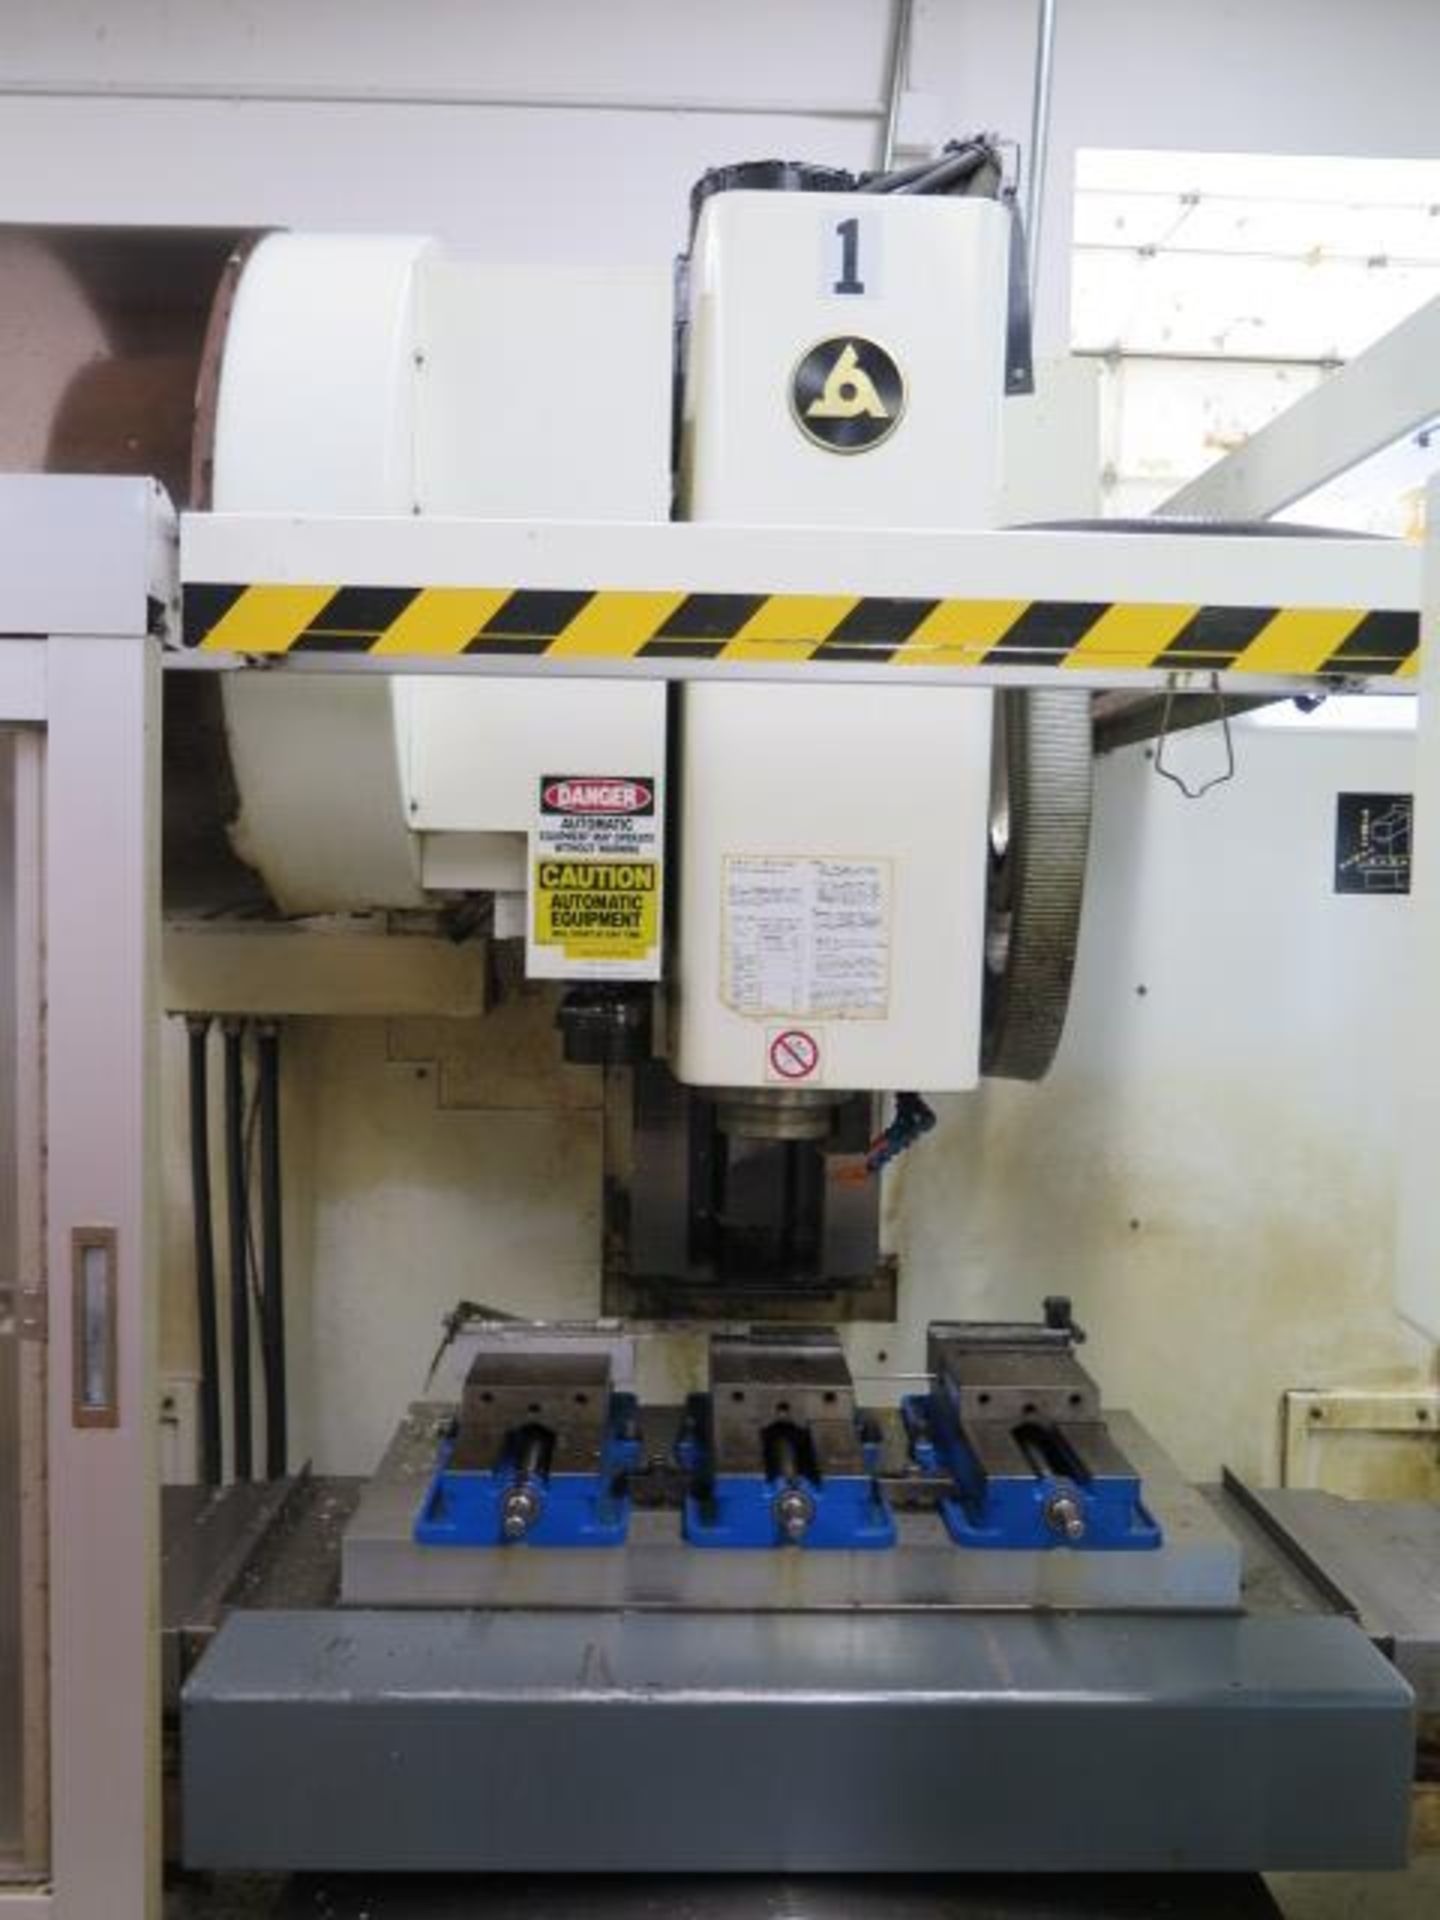 Kitamura Mycenter-3x CNC VMC s/n 11710 w/ Yasnac Controls, 24-Station STC, SOLD AS IS - Image 4 of 13